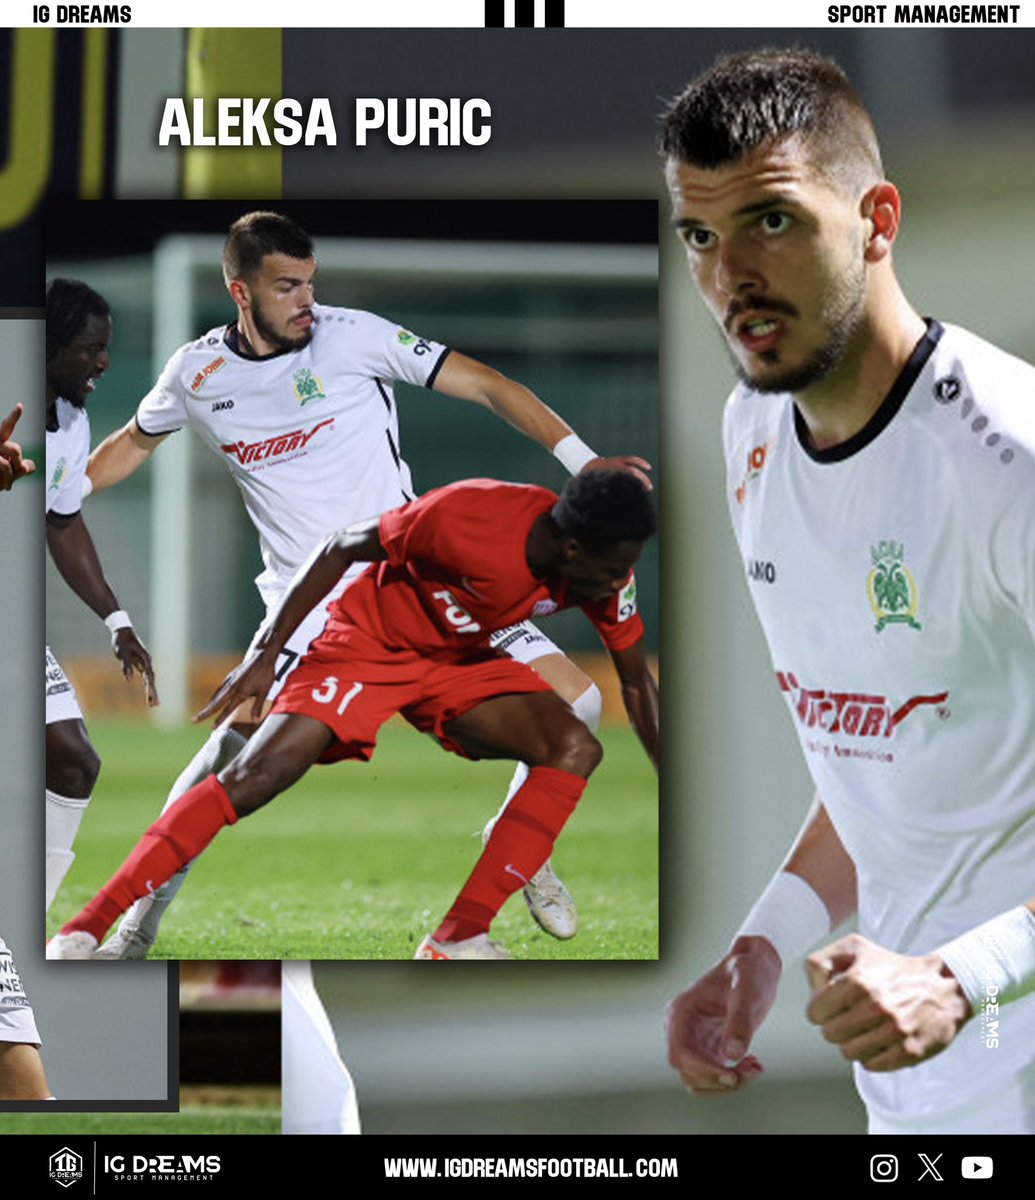 🎯Goal from our defender ALEKSA PURIC to give the victory to the first division @DoxaFC of Cyprus.

Great season of our defense, which is being consecrated as one of the best defenders in the league.🙌🏻

IG DREAMS SPORT #MANAGEMENT
•

#IGdreams #Sports #Agency #Representation